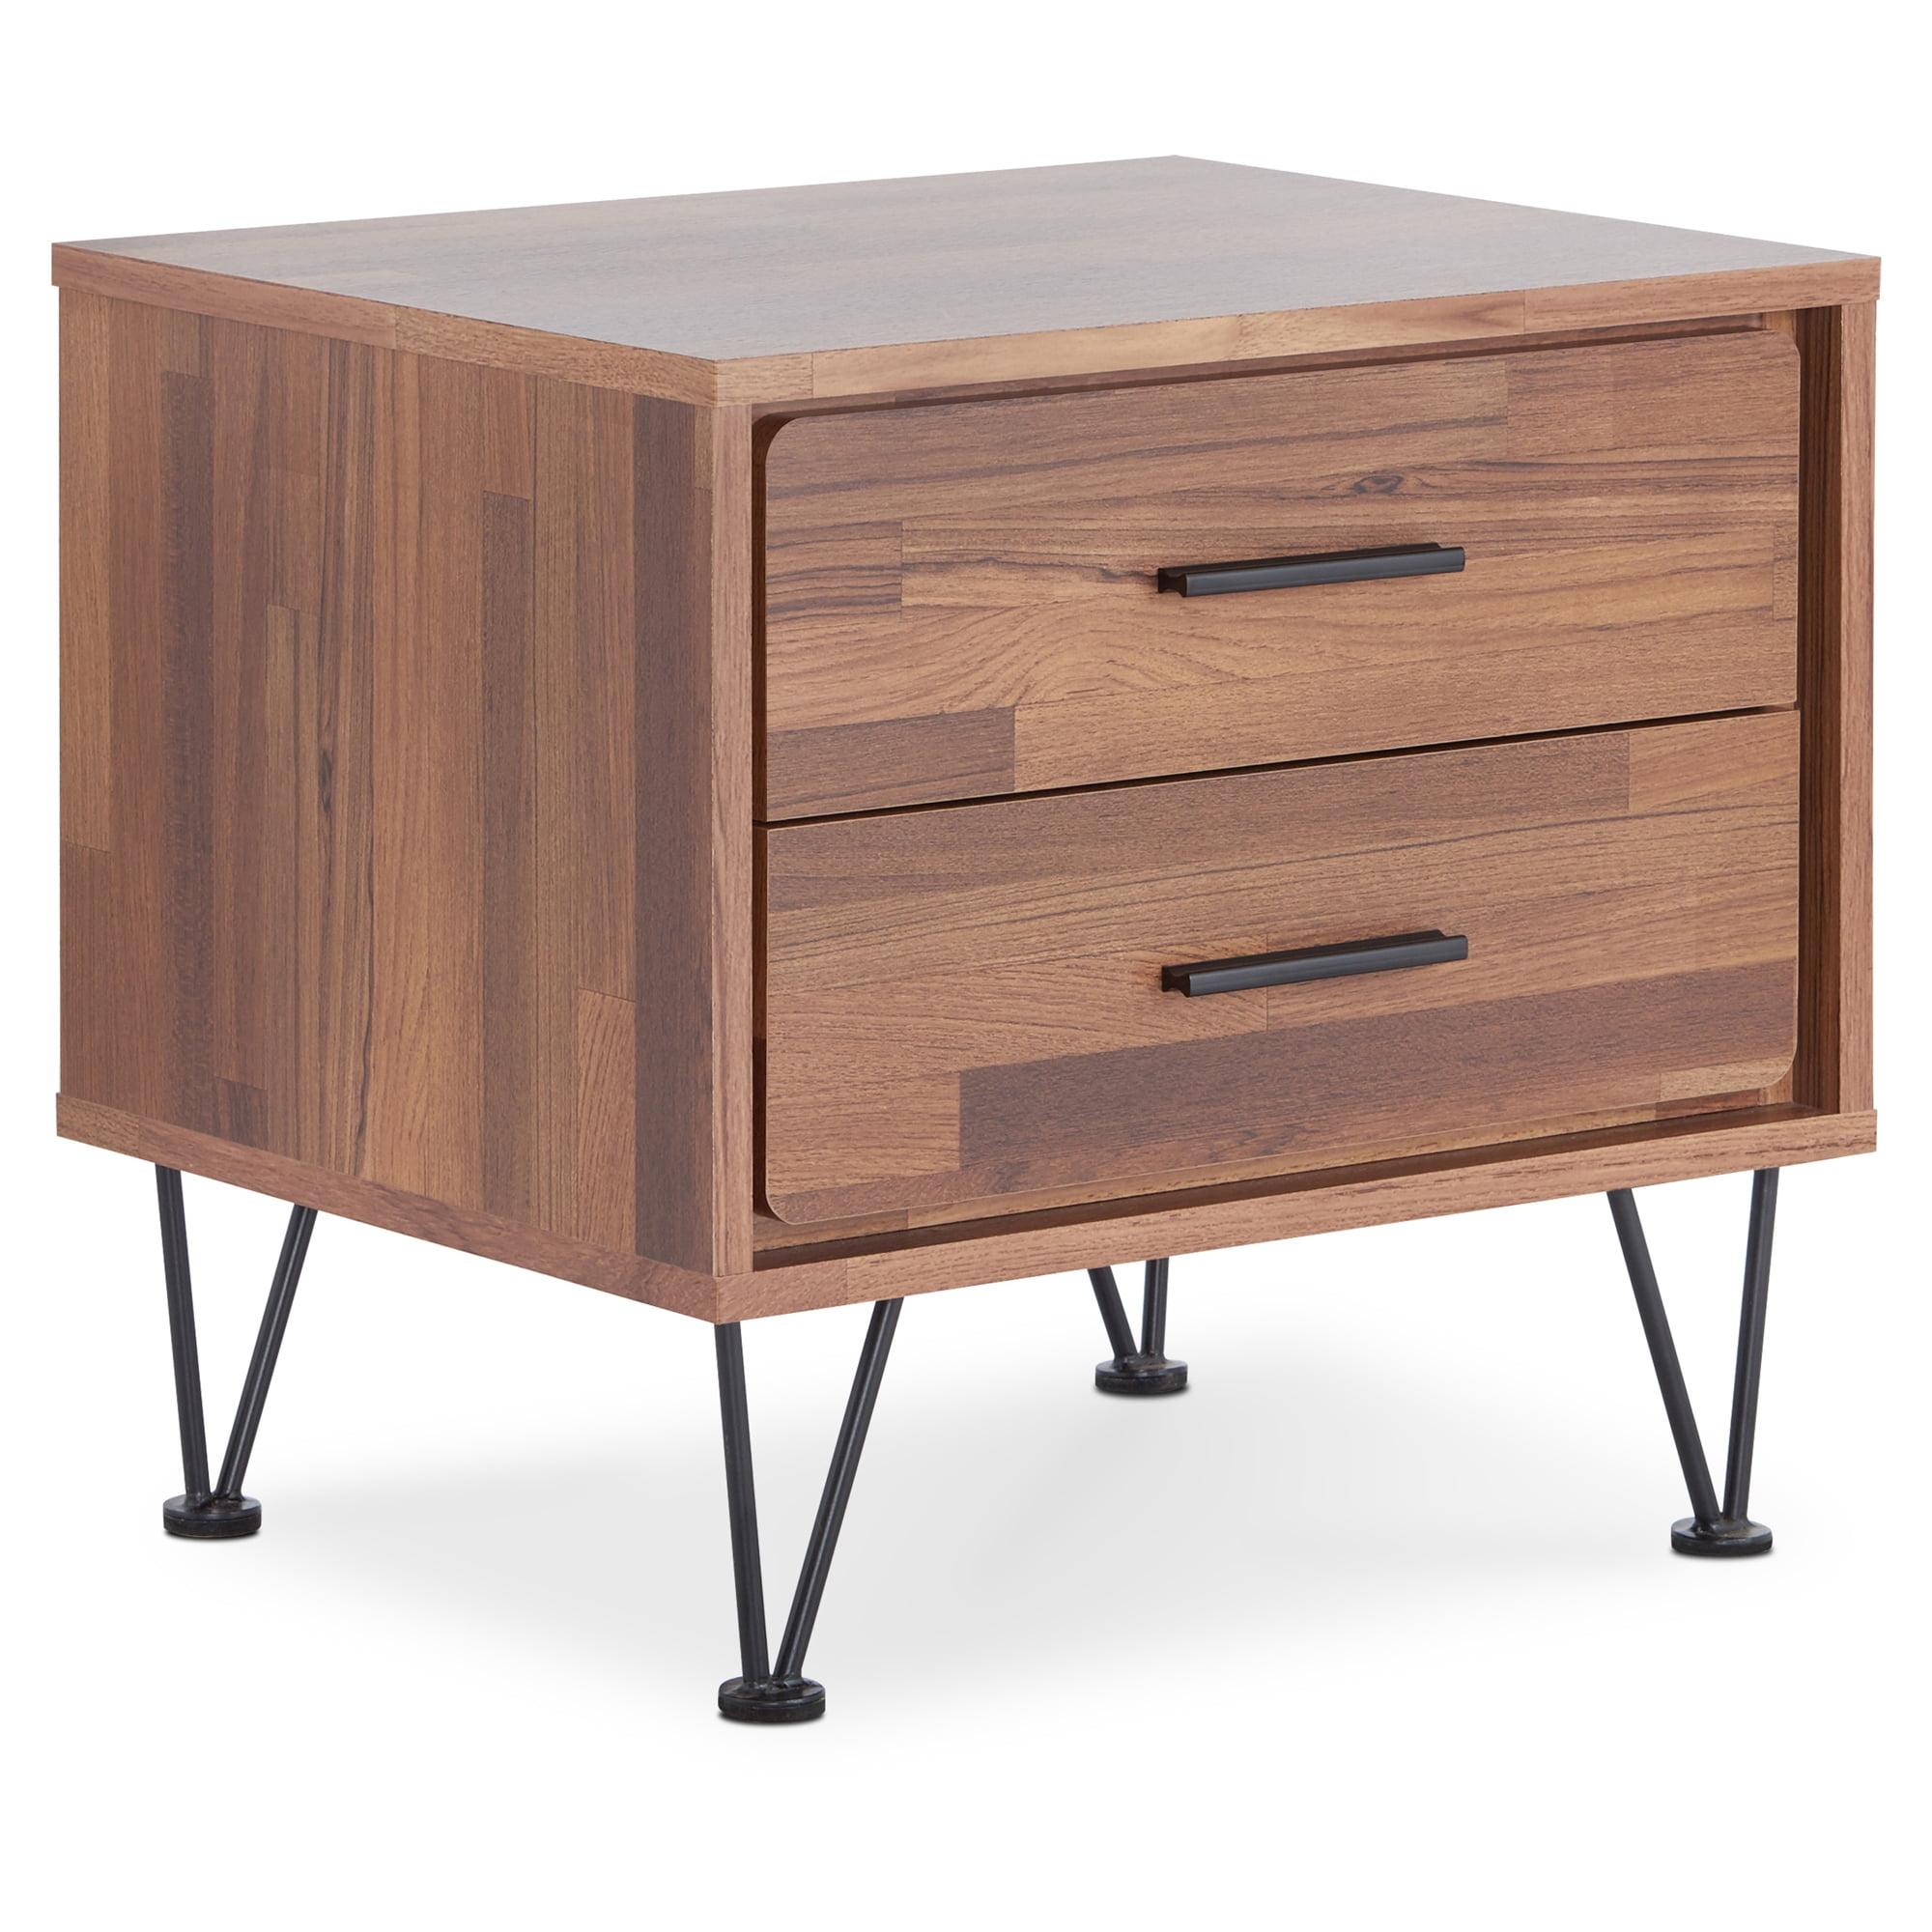 Elegant Walnut Finish 2-Drawer Accent Table with Metal Hardware